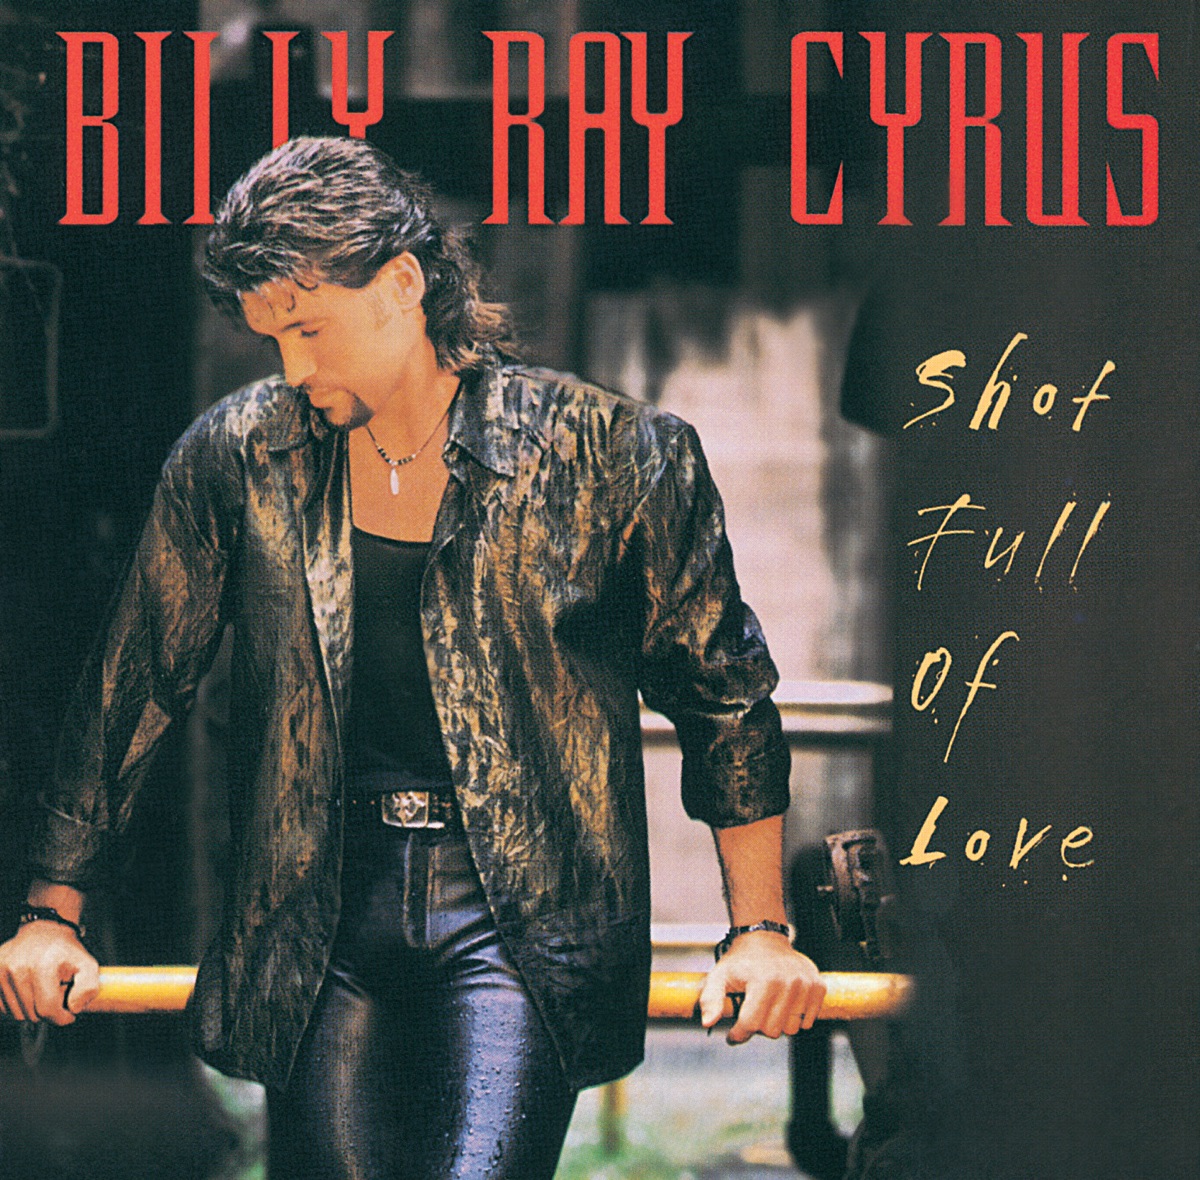 Some Gave All by Billy Ray Cyrus on Apple Music